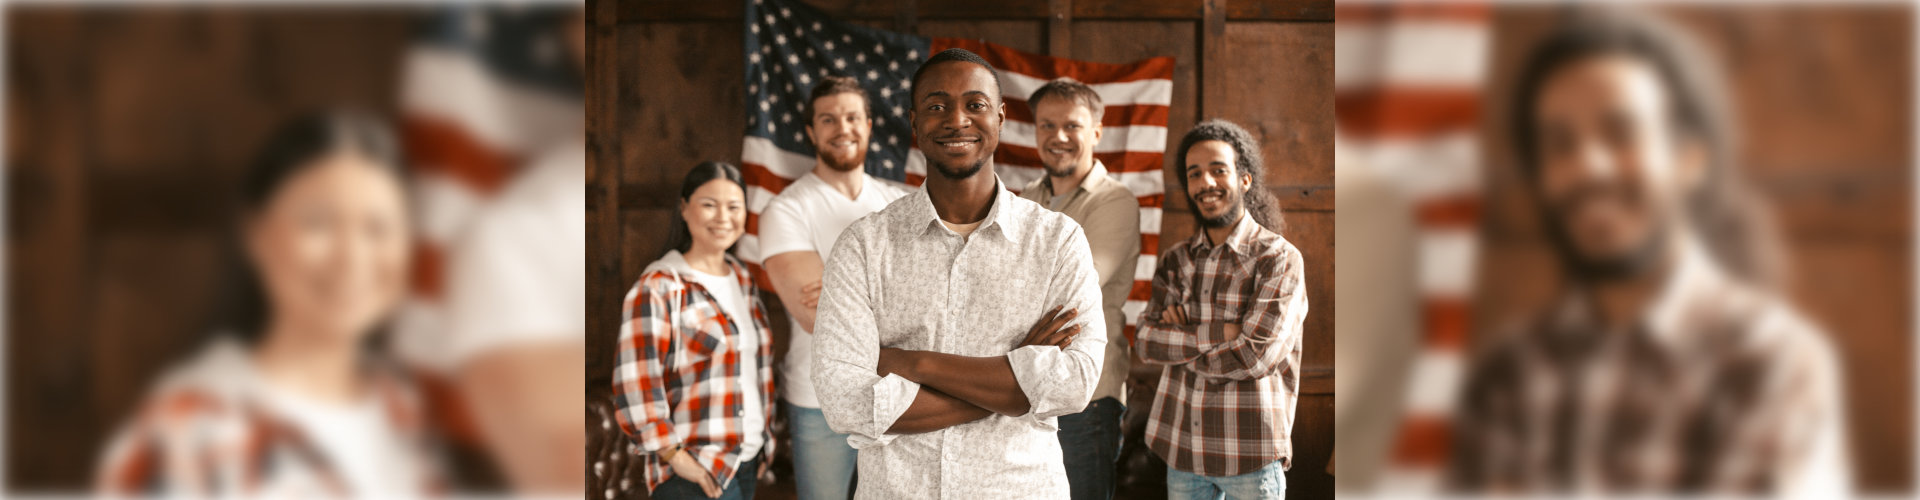 group of people in front of american flag